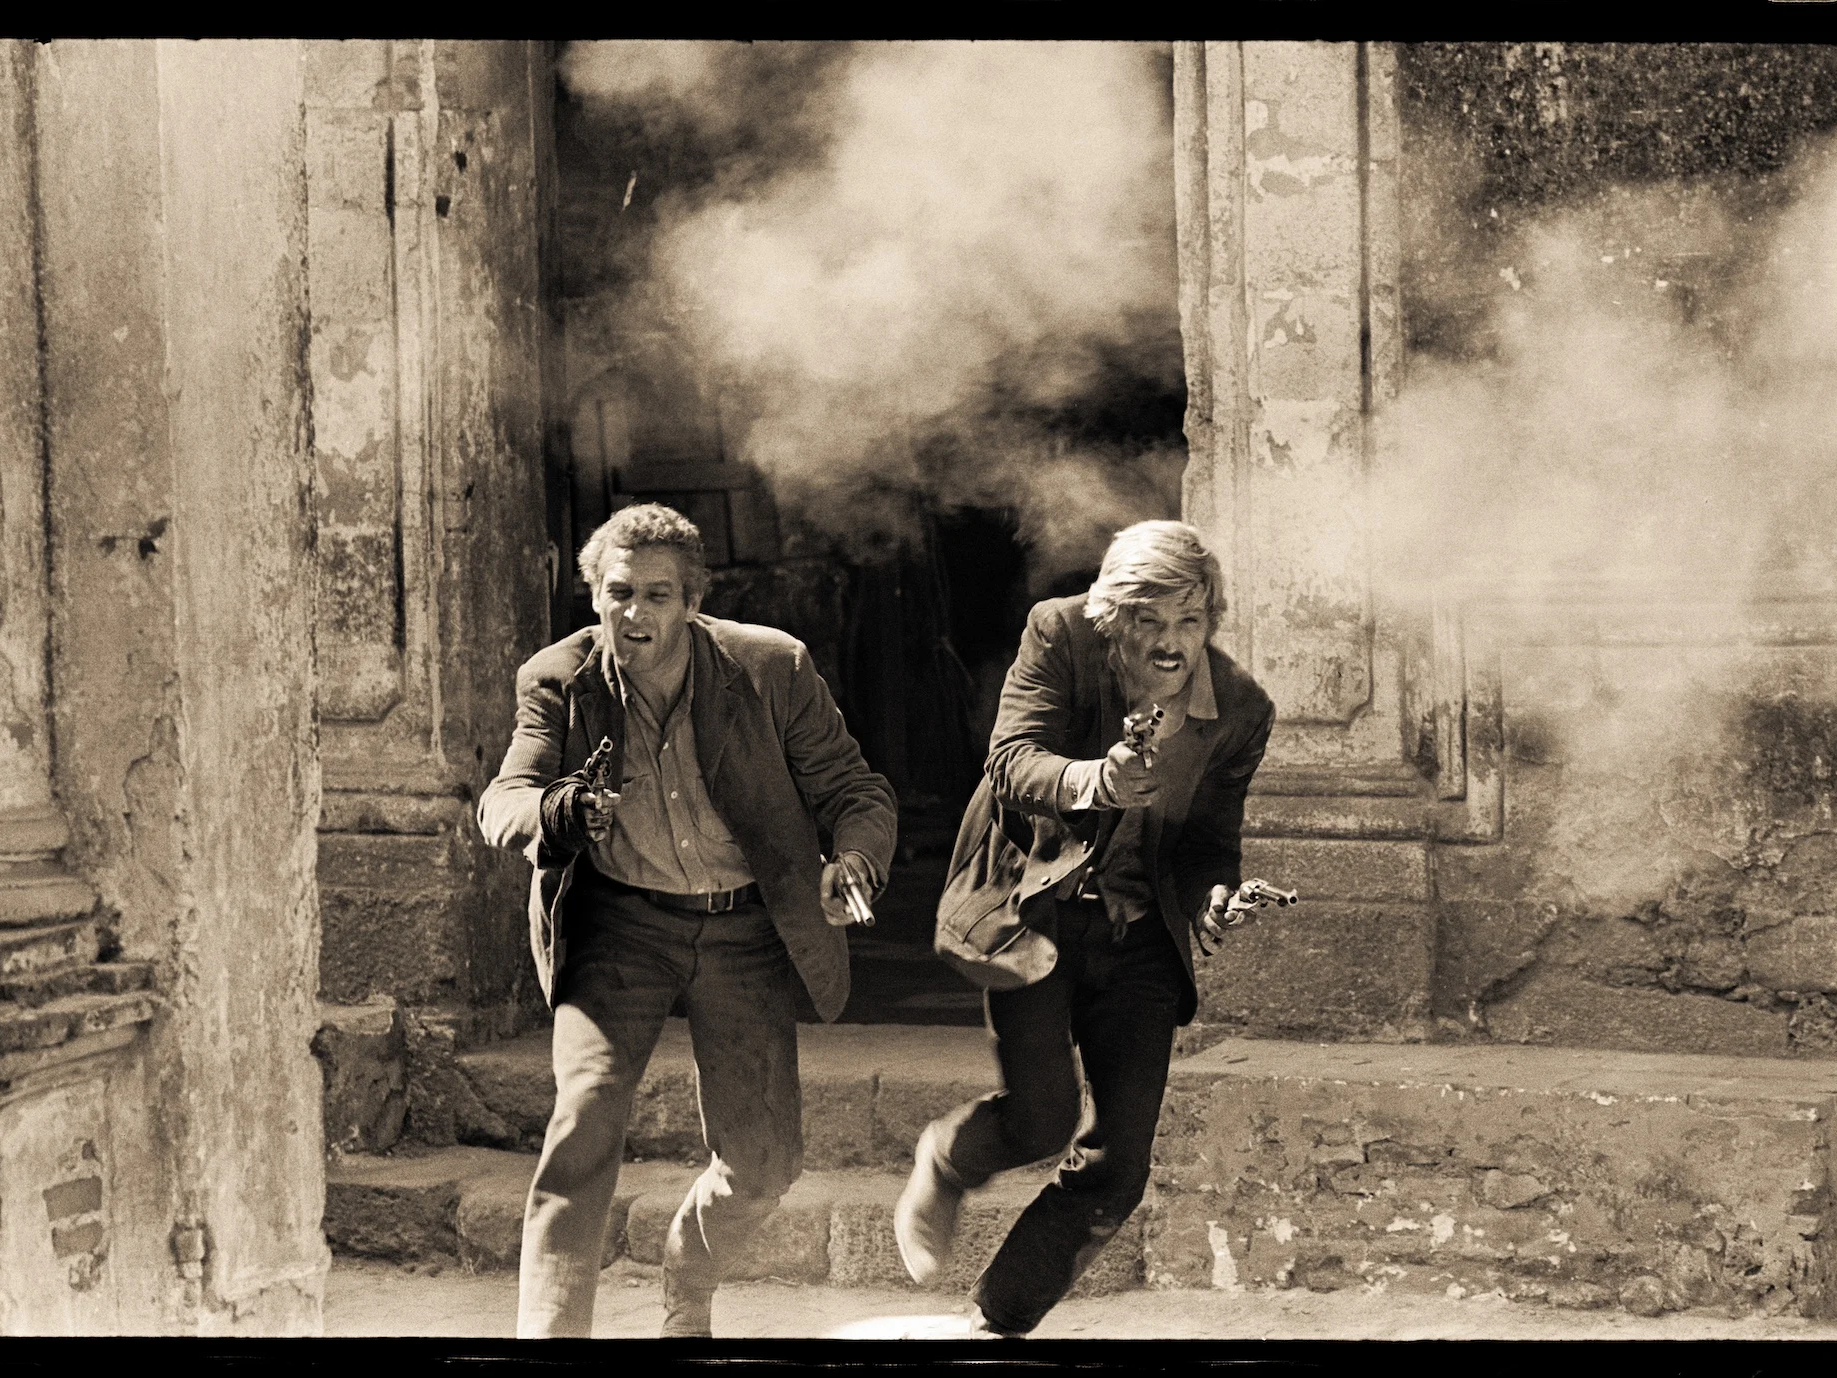 Butch Cassidy and the Sundance Kid, Paul Newman and Robert Redford, 1968